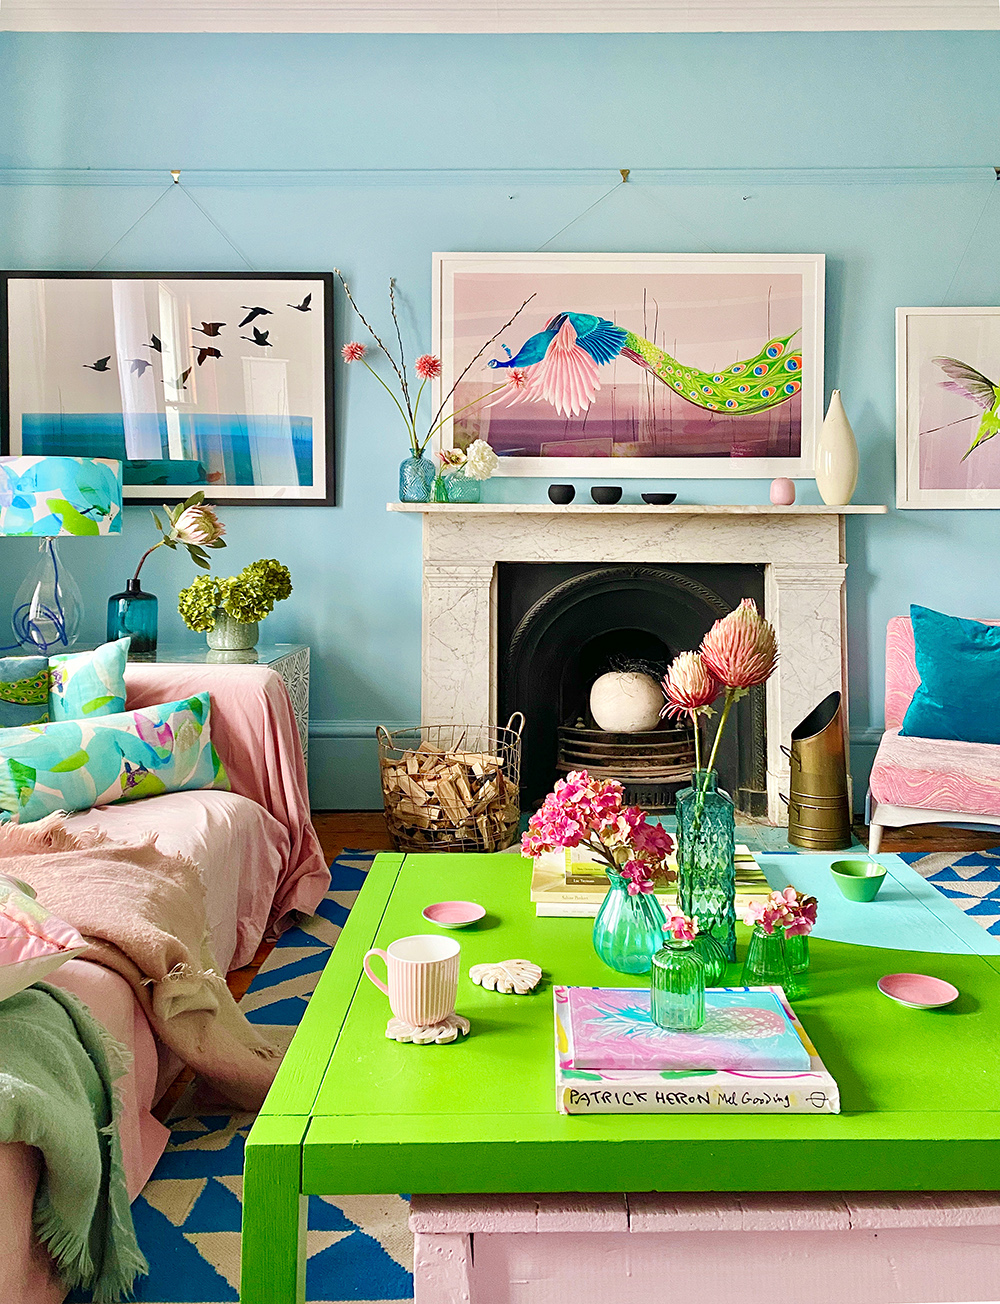 How to use colour in your home - blues and greens are calming and nourishing colours, great for rooms you want to relax